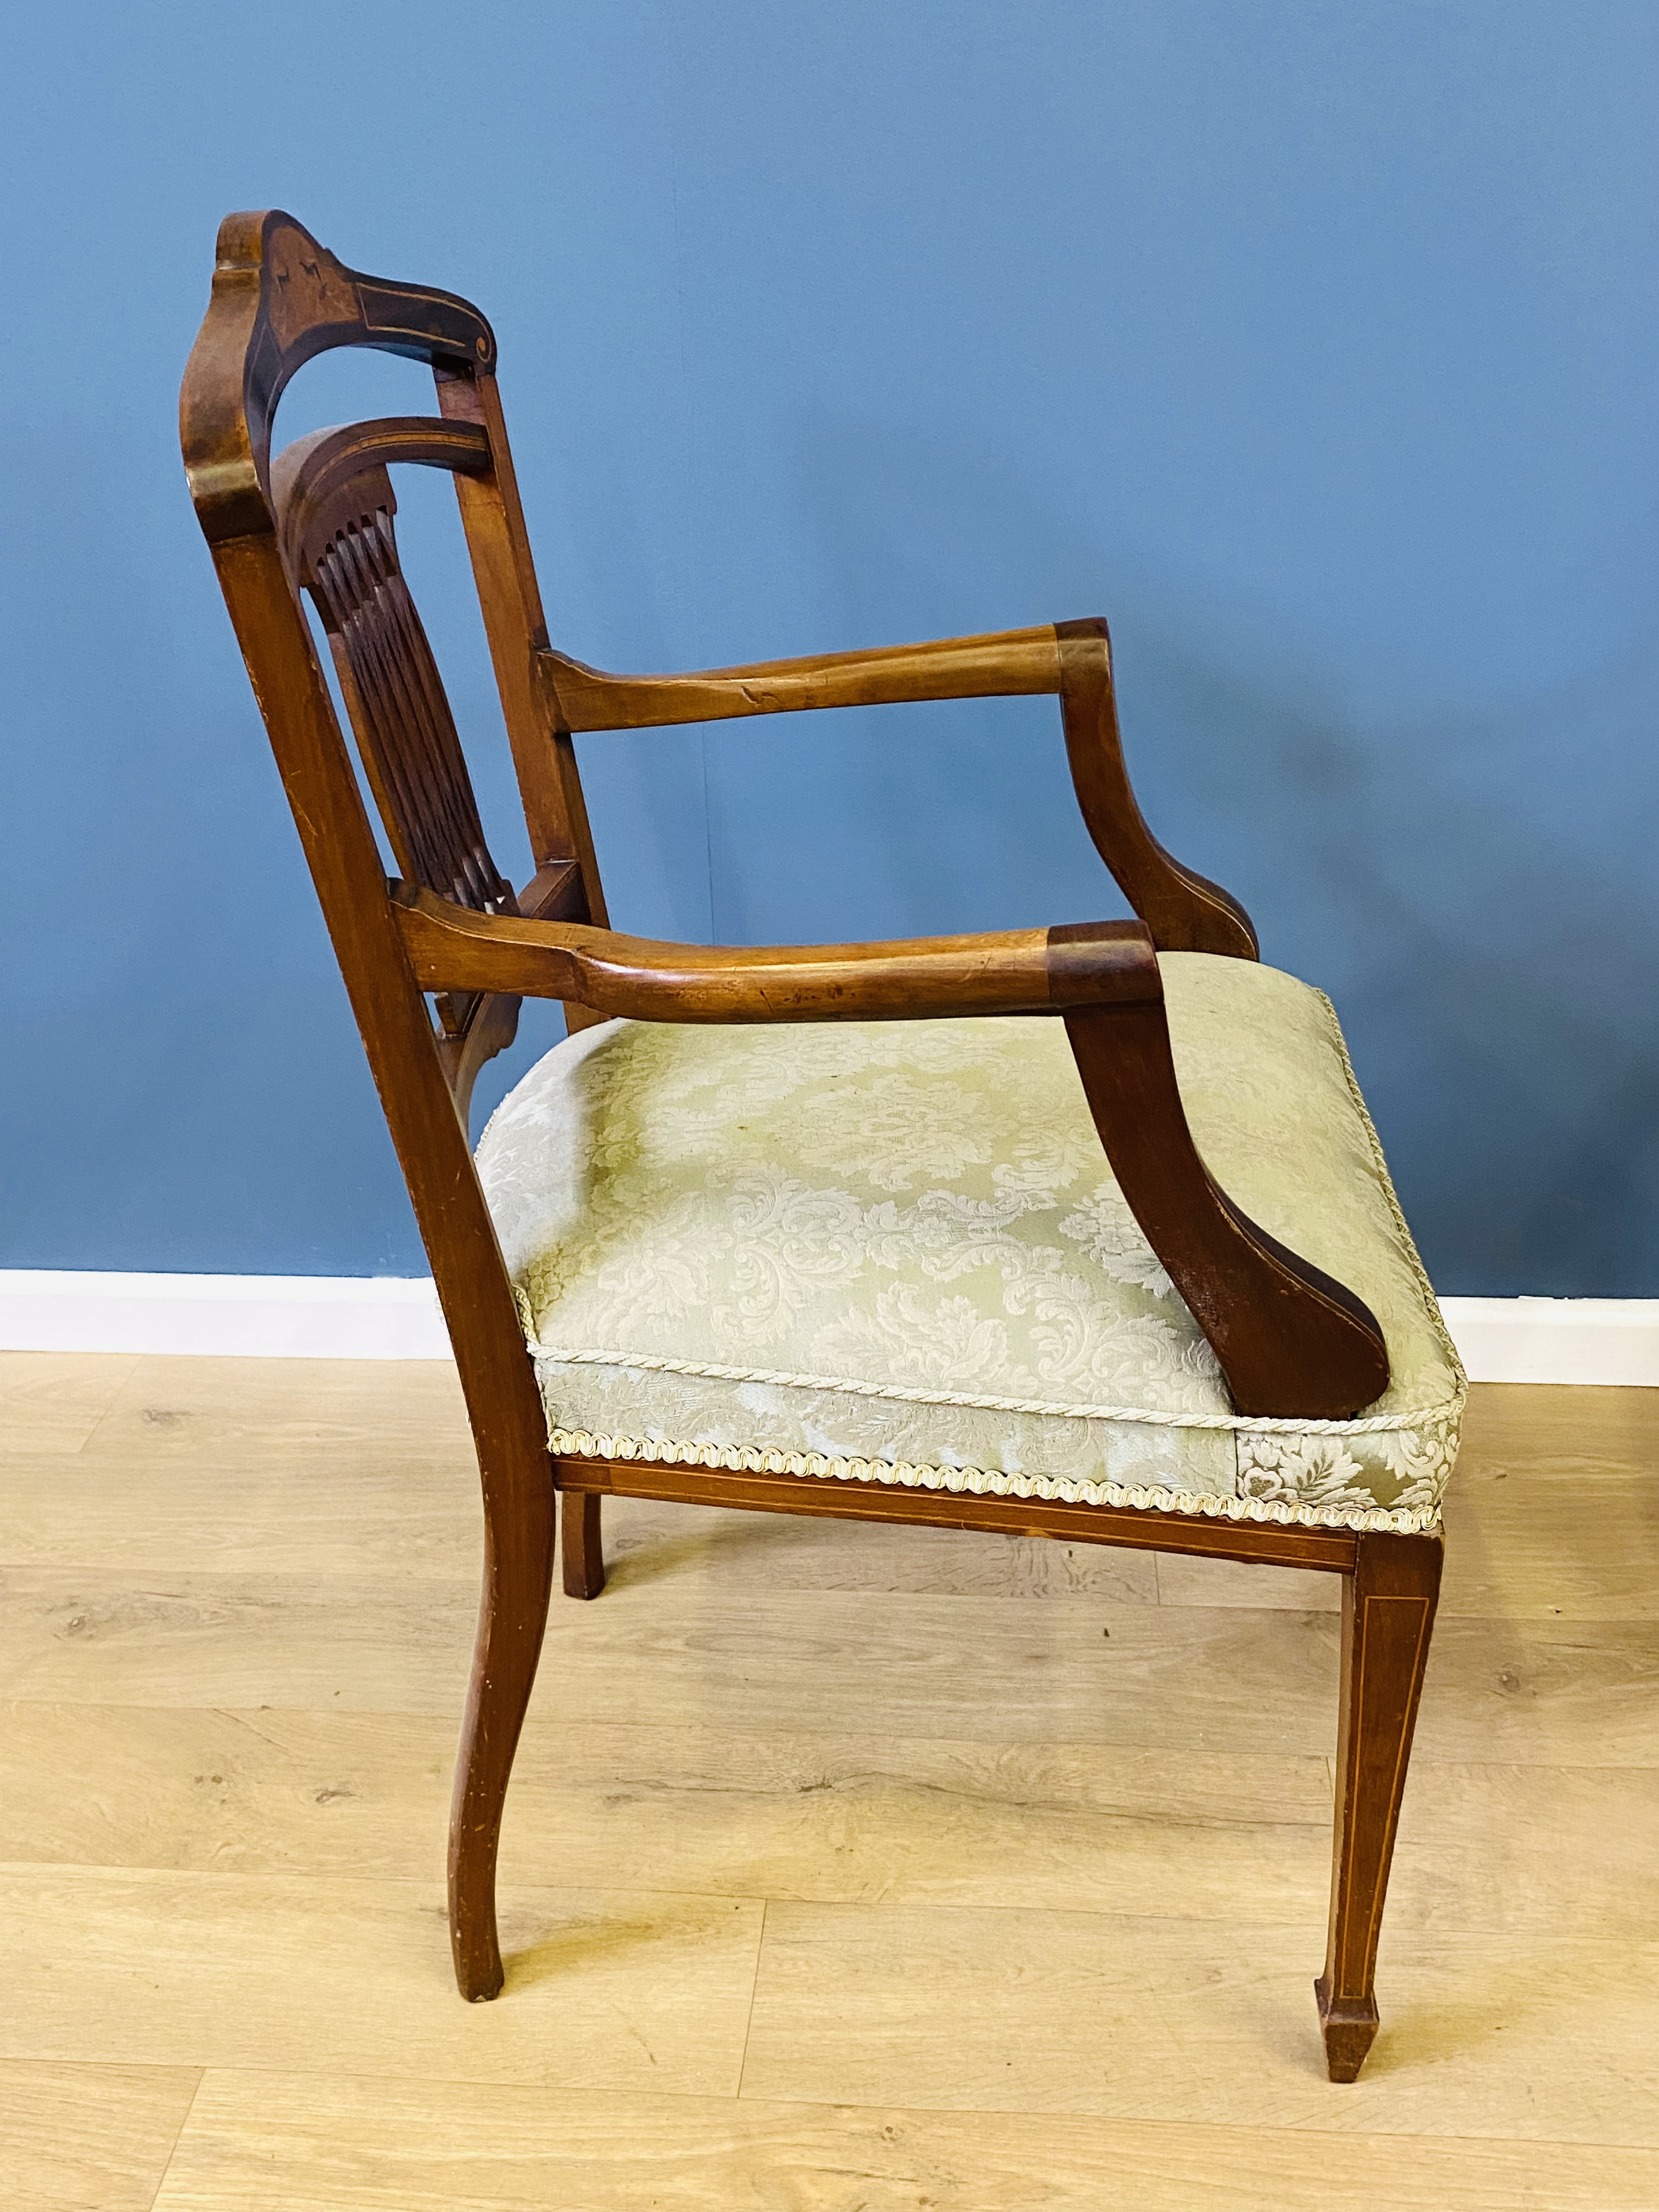 Pair of Edwardian open elbow chairs - Image 5 of 6